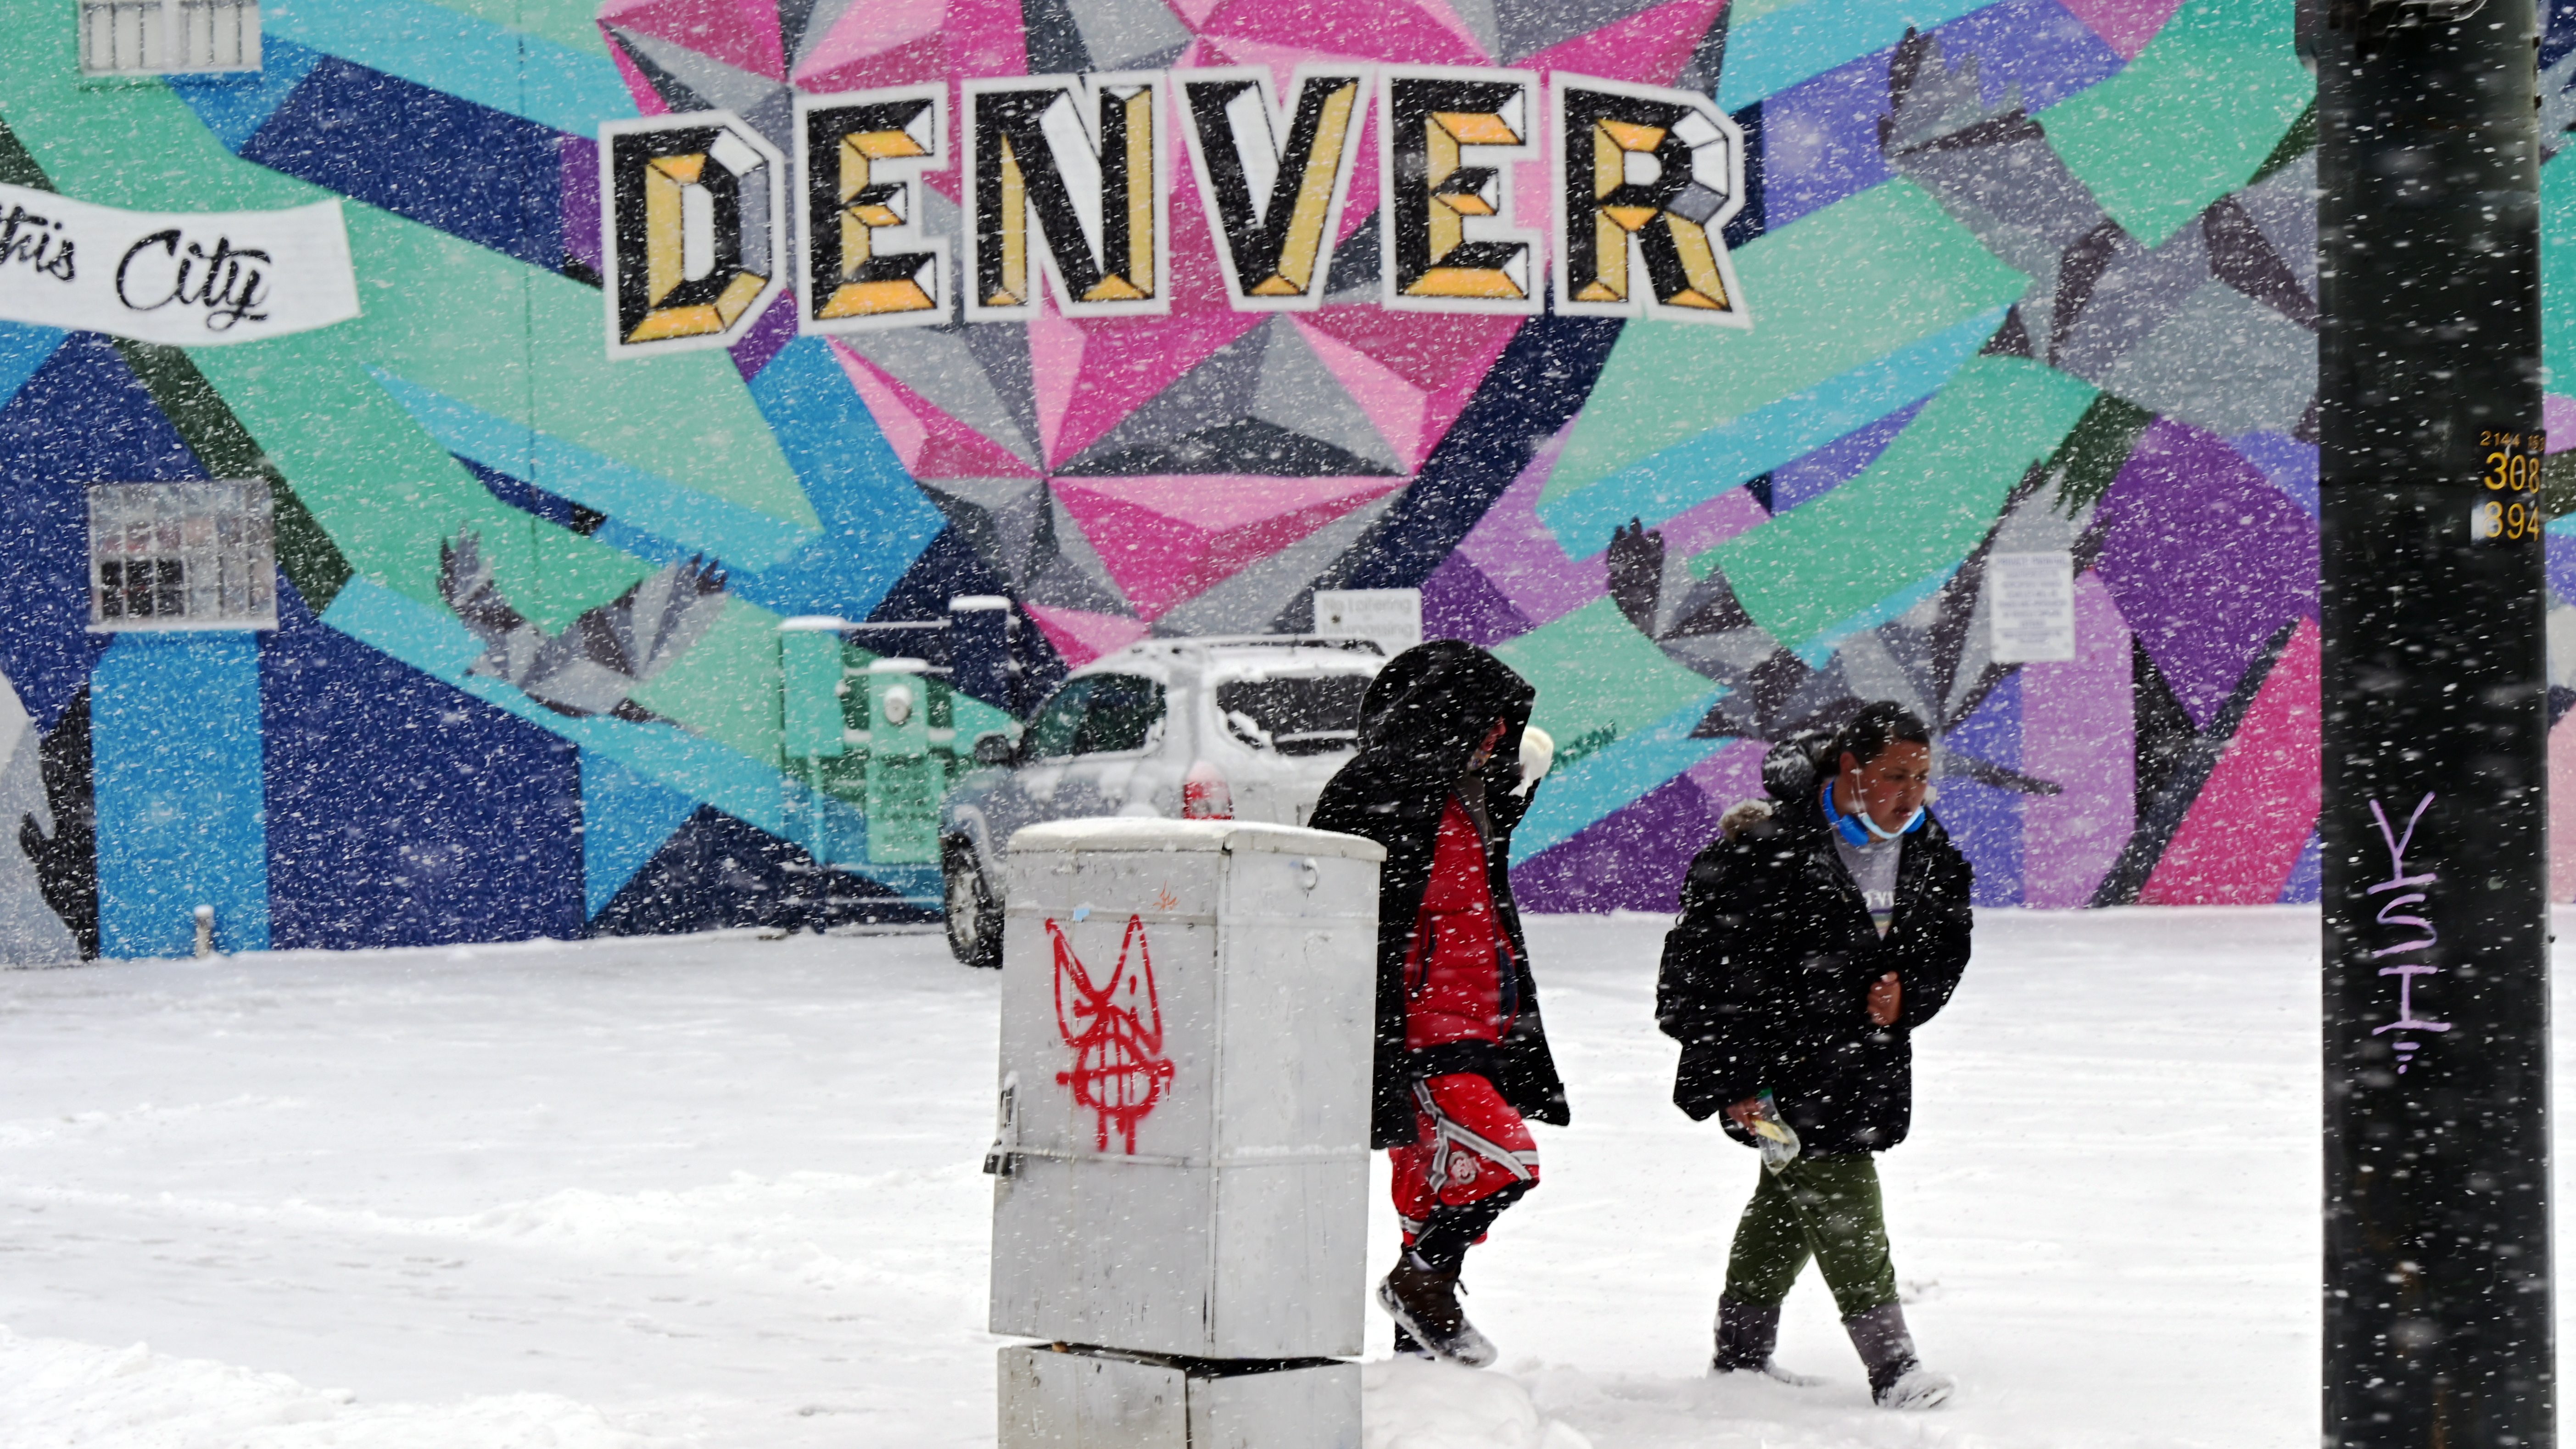 Colorado Turns to Ice-Fishing Tents as Shelter for Homeless – NBC Boston